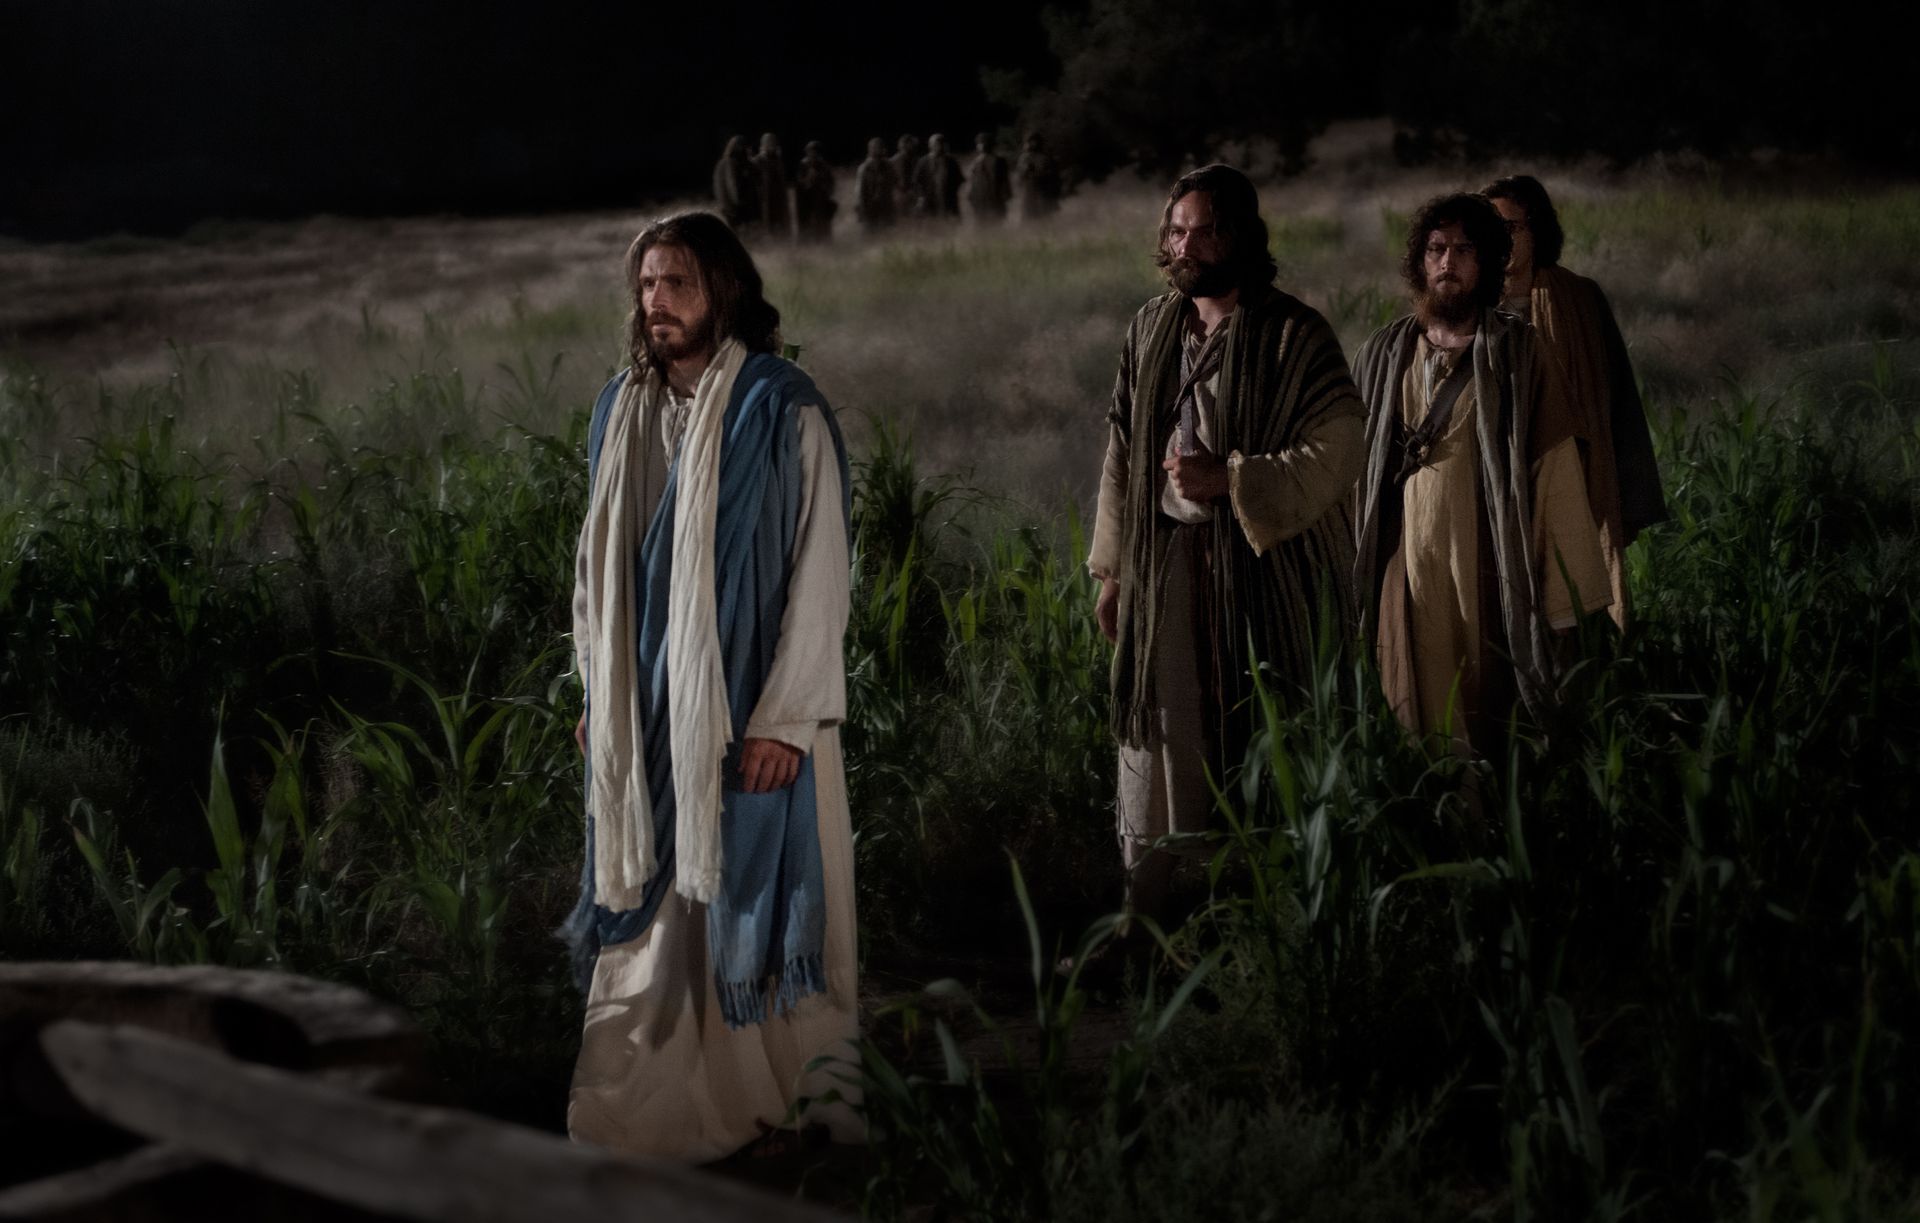 Christ walking ahead of His disciples into the Garden of Gethsemane.